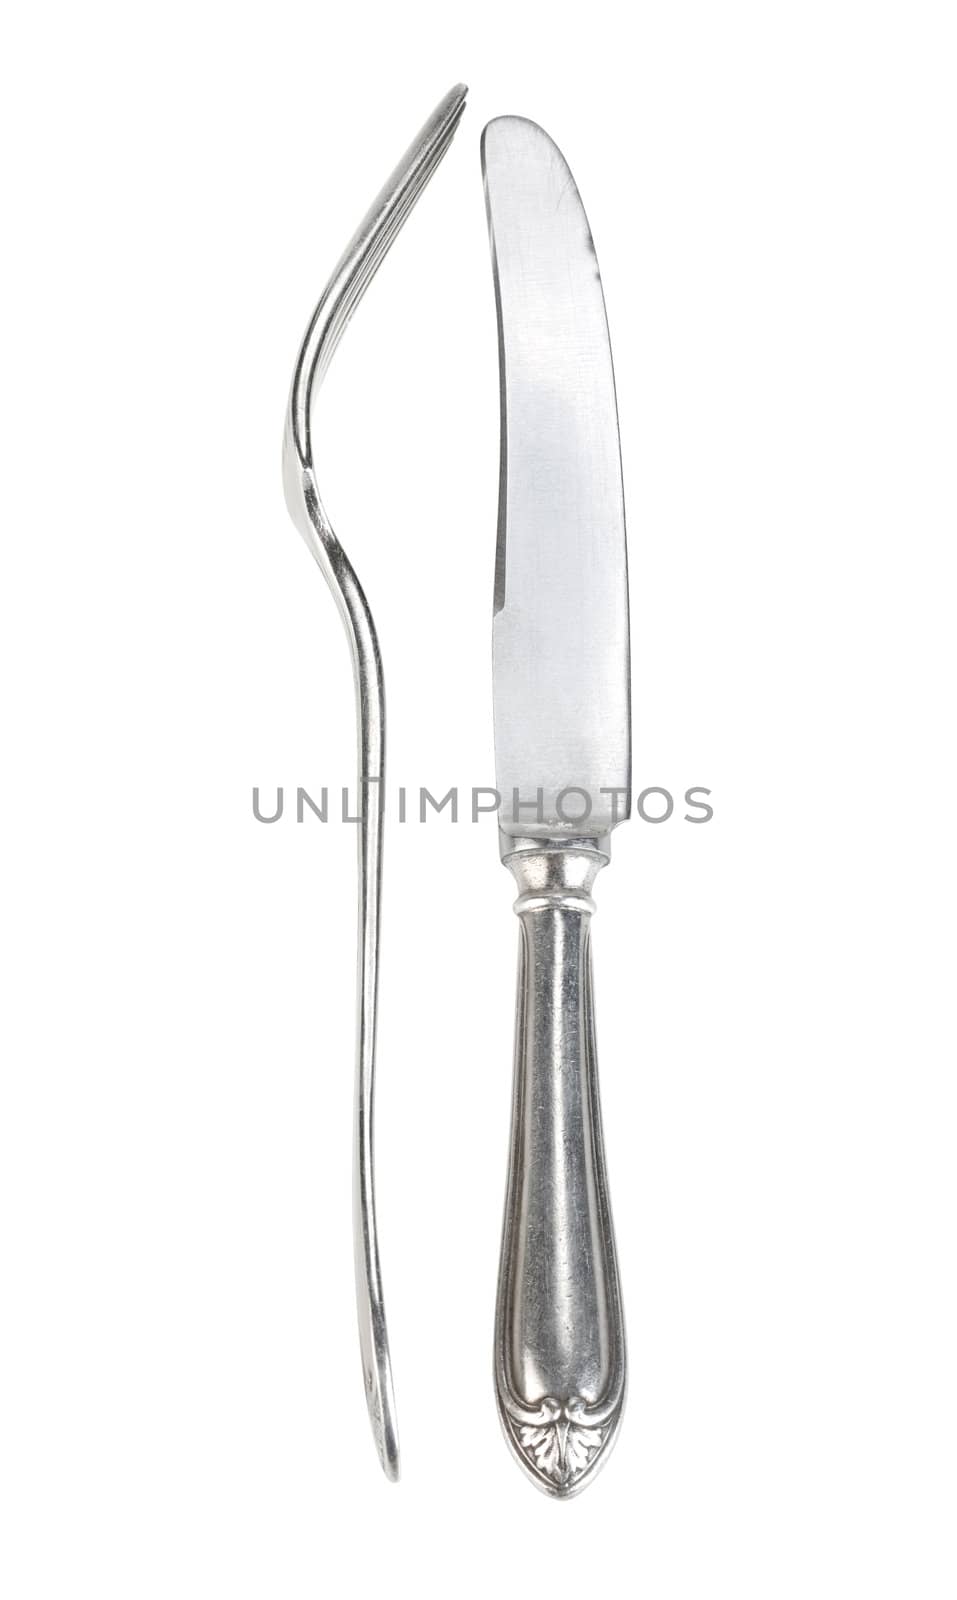 Knife and fork isolated on white background. With clipping path.